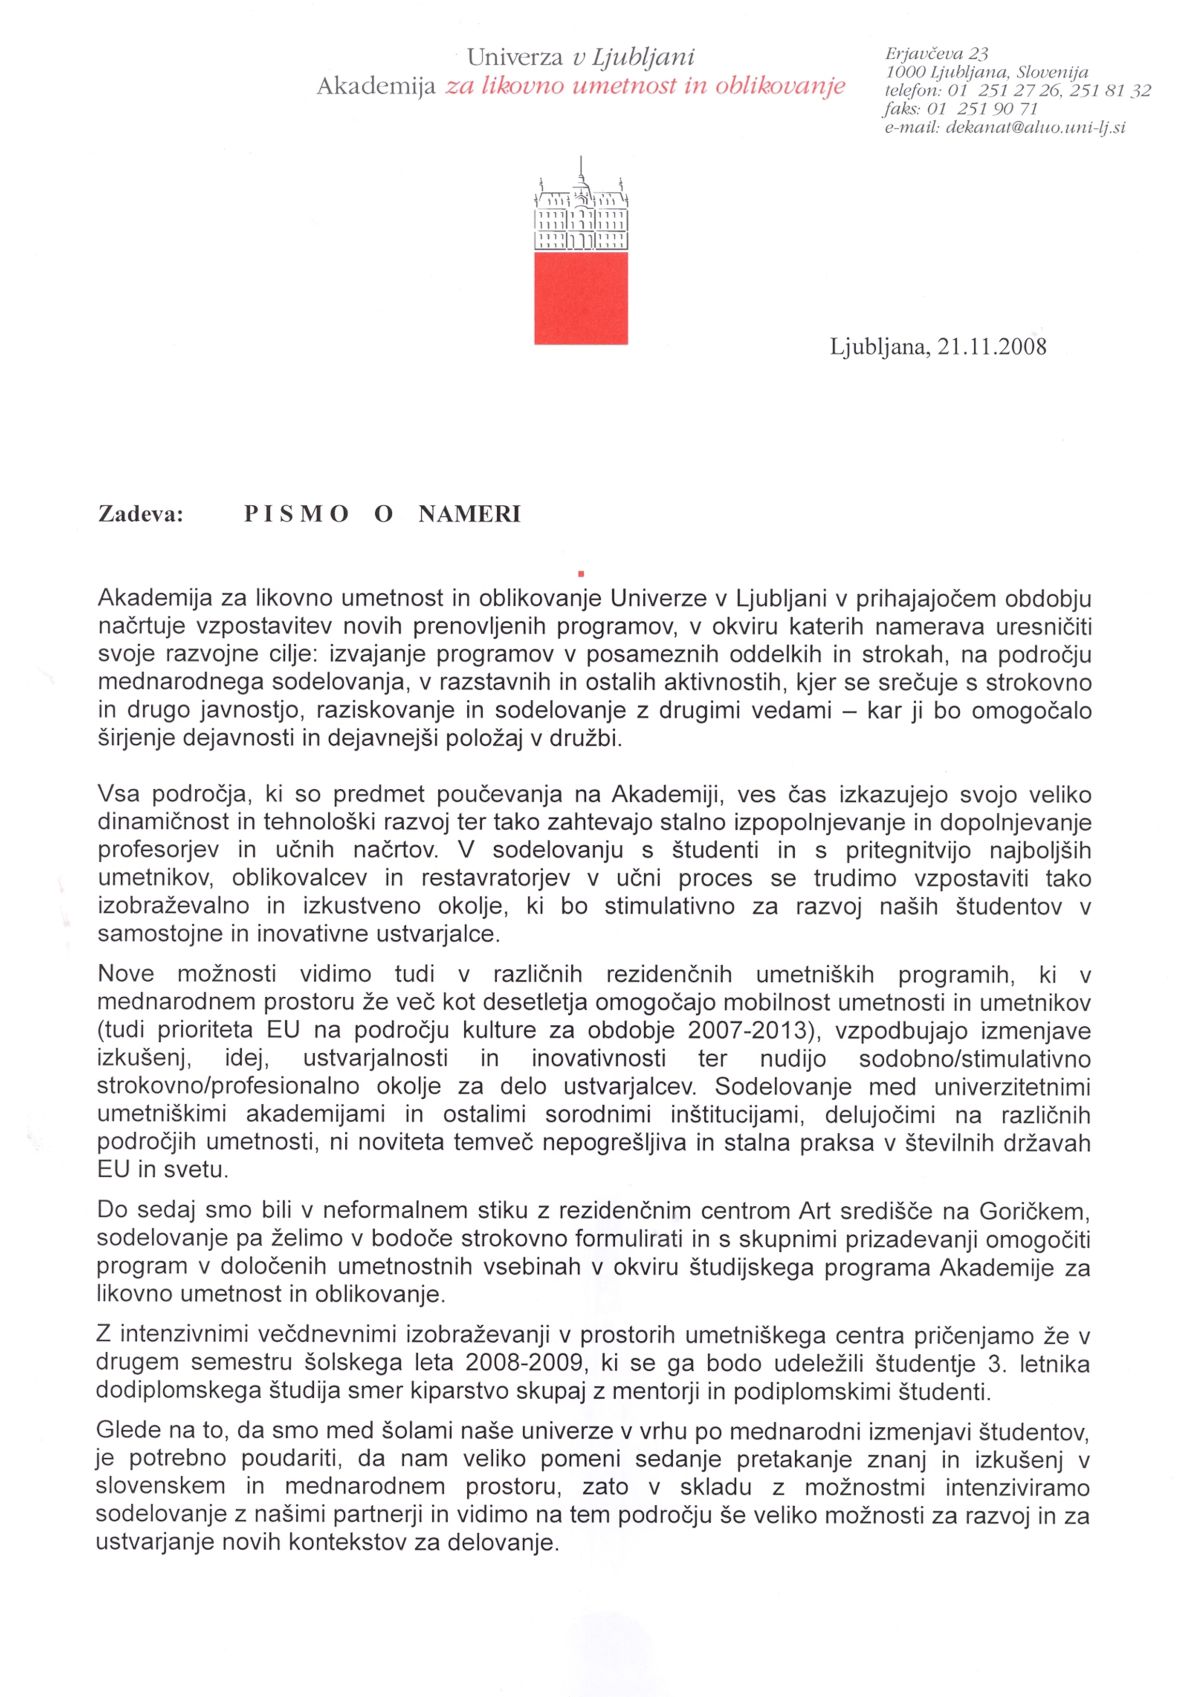 Letter of intent for cooperation, Academy of Fine Arts and Design Ljubljana, November 2008. (Director of the Art Center Institute for Development and the Art.)